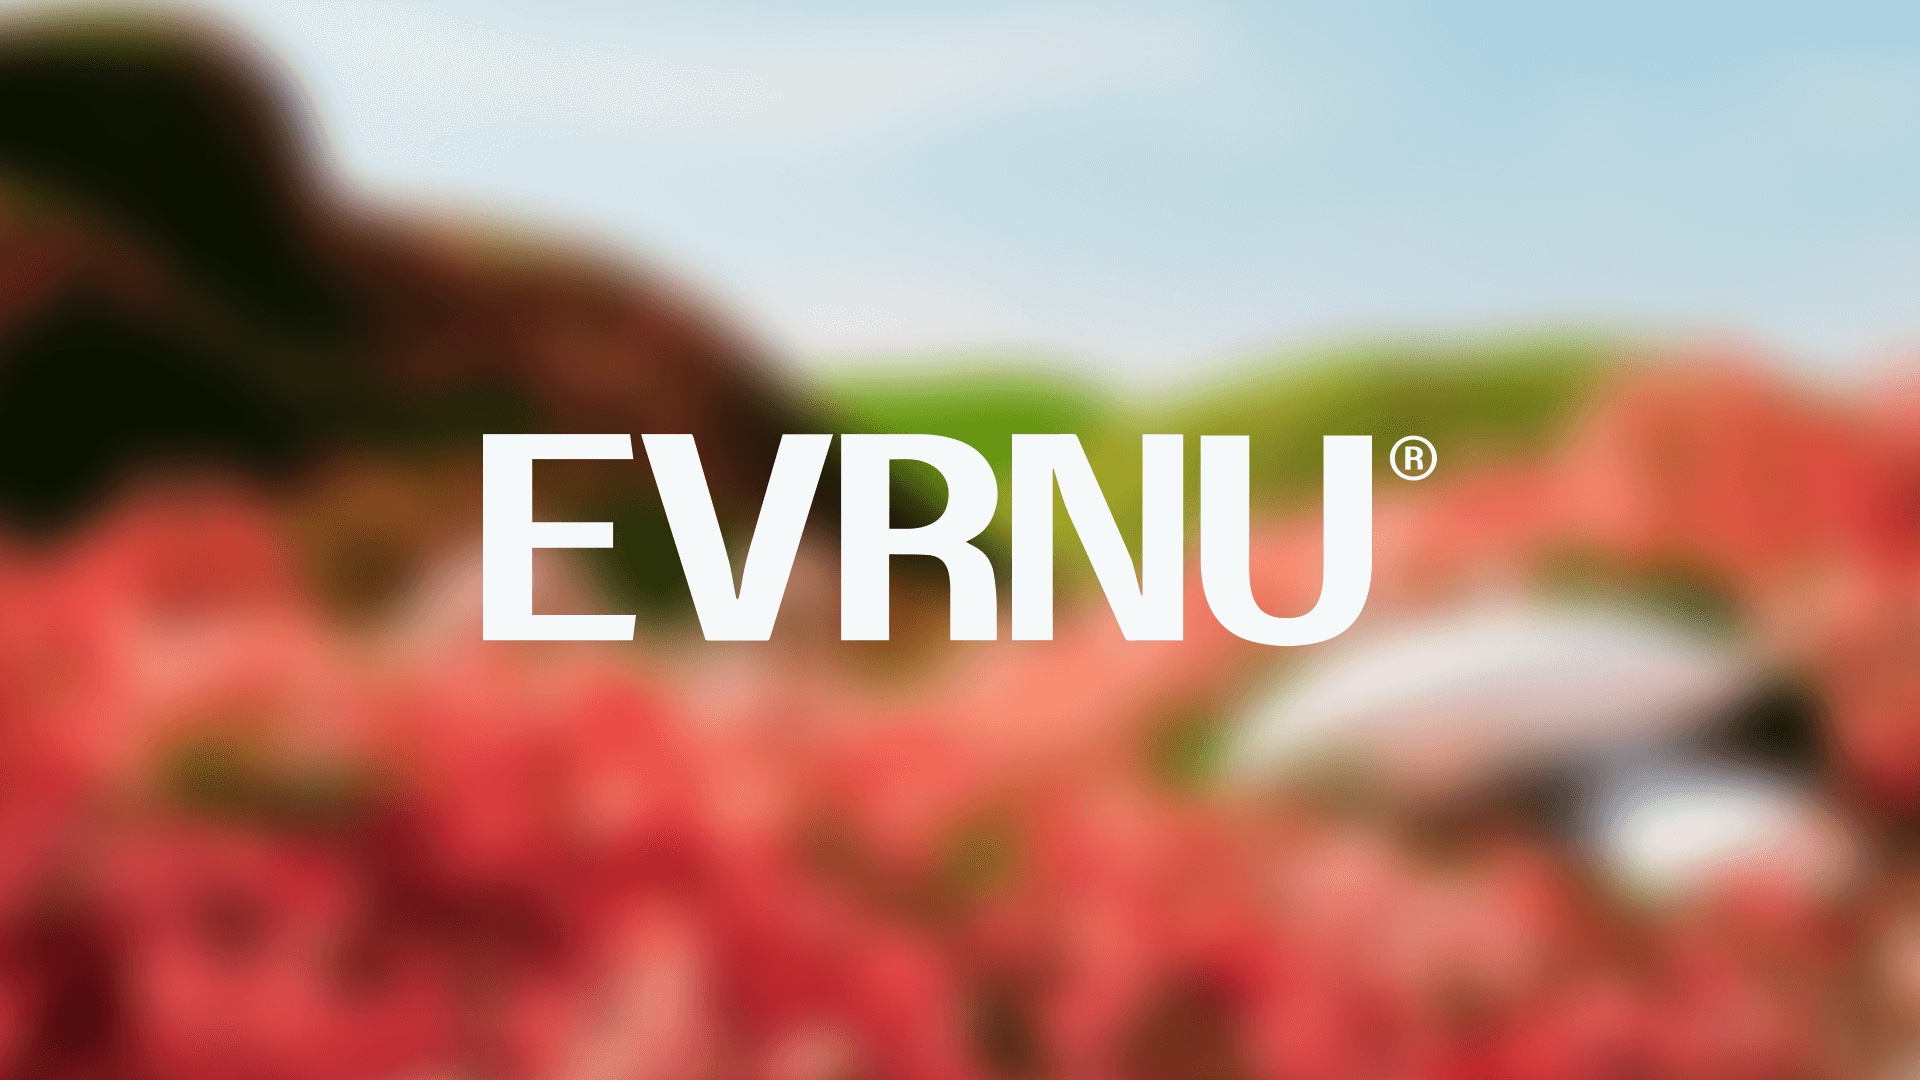 Evrnu Reveals New Identity and Branding With Design by Dept